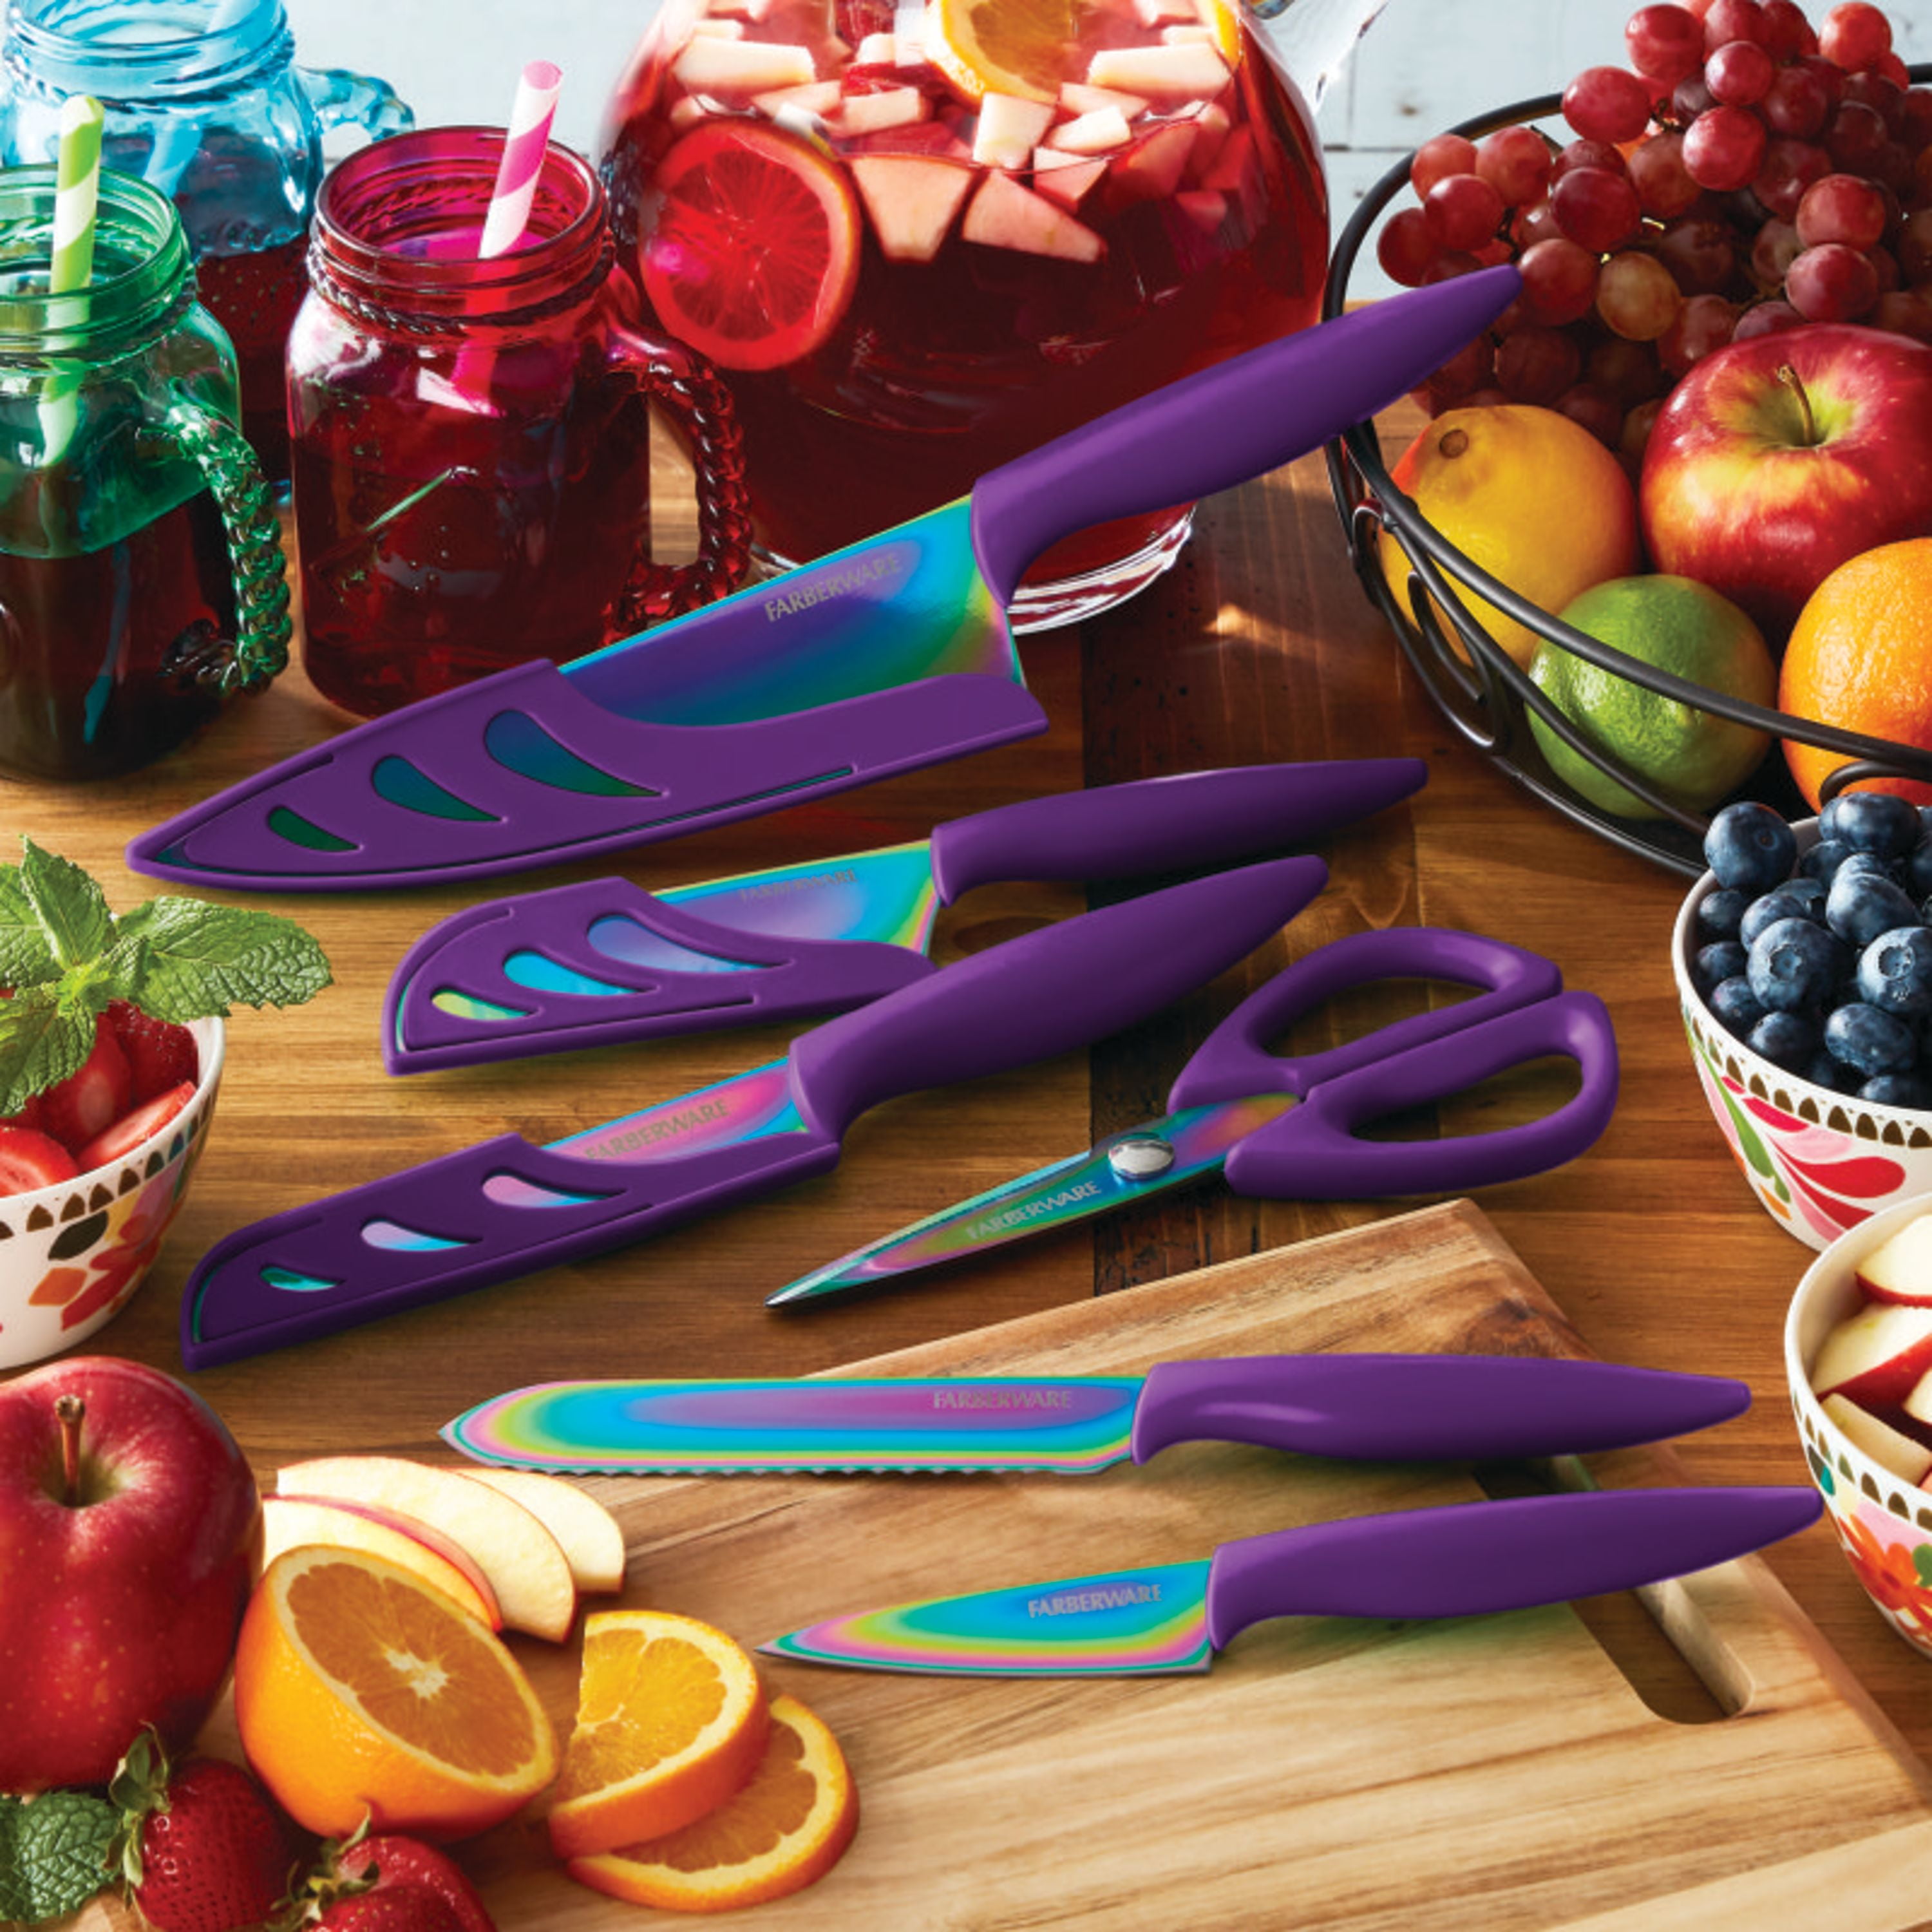 Farberware Tie Dye Pattern Knife Set with Shears and Blade Covers,  15-Piece, Multicolor